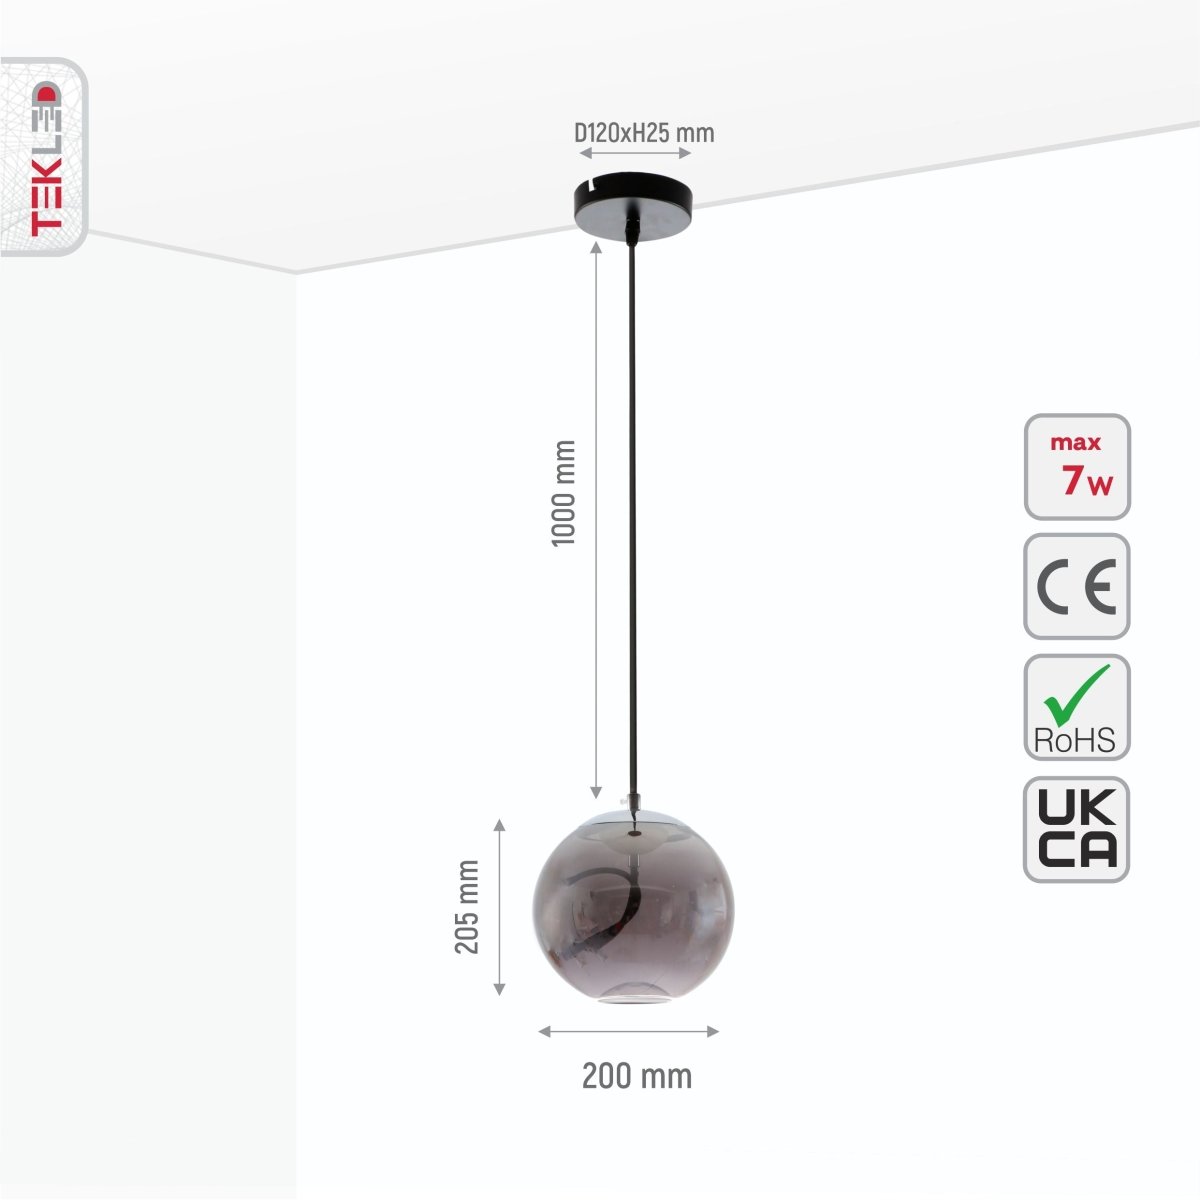 Size and specs of Smoky Glass Globe Pendant Light S with Built-in LED 4.5W | TEKLED 159-17336